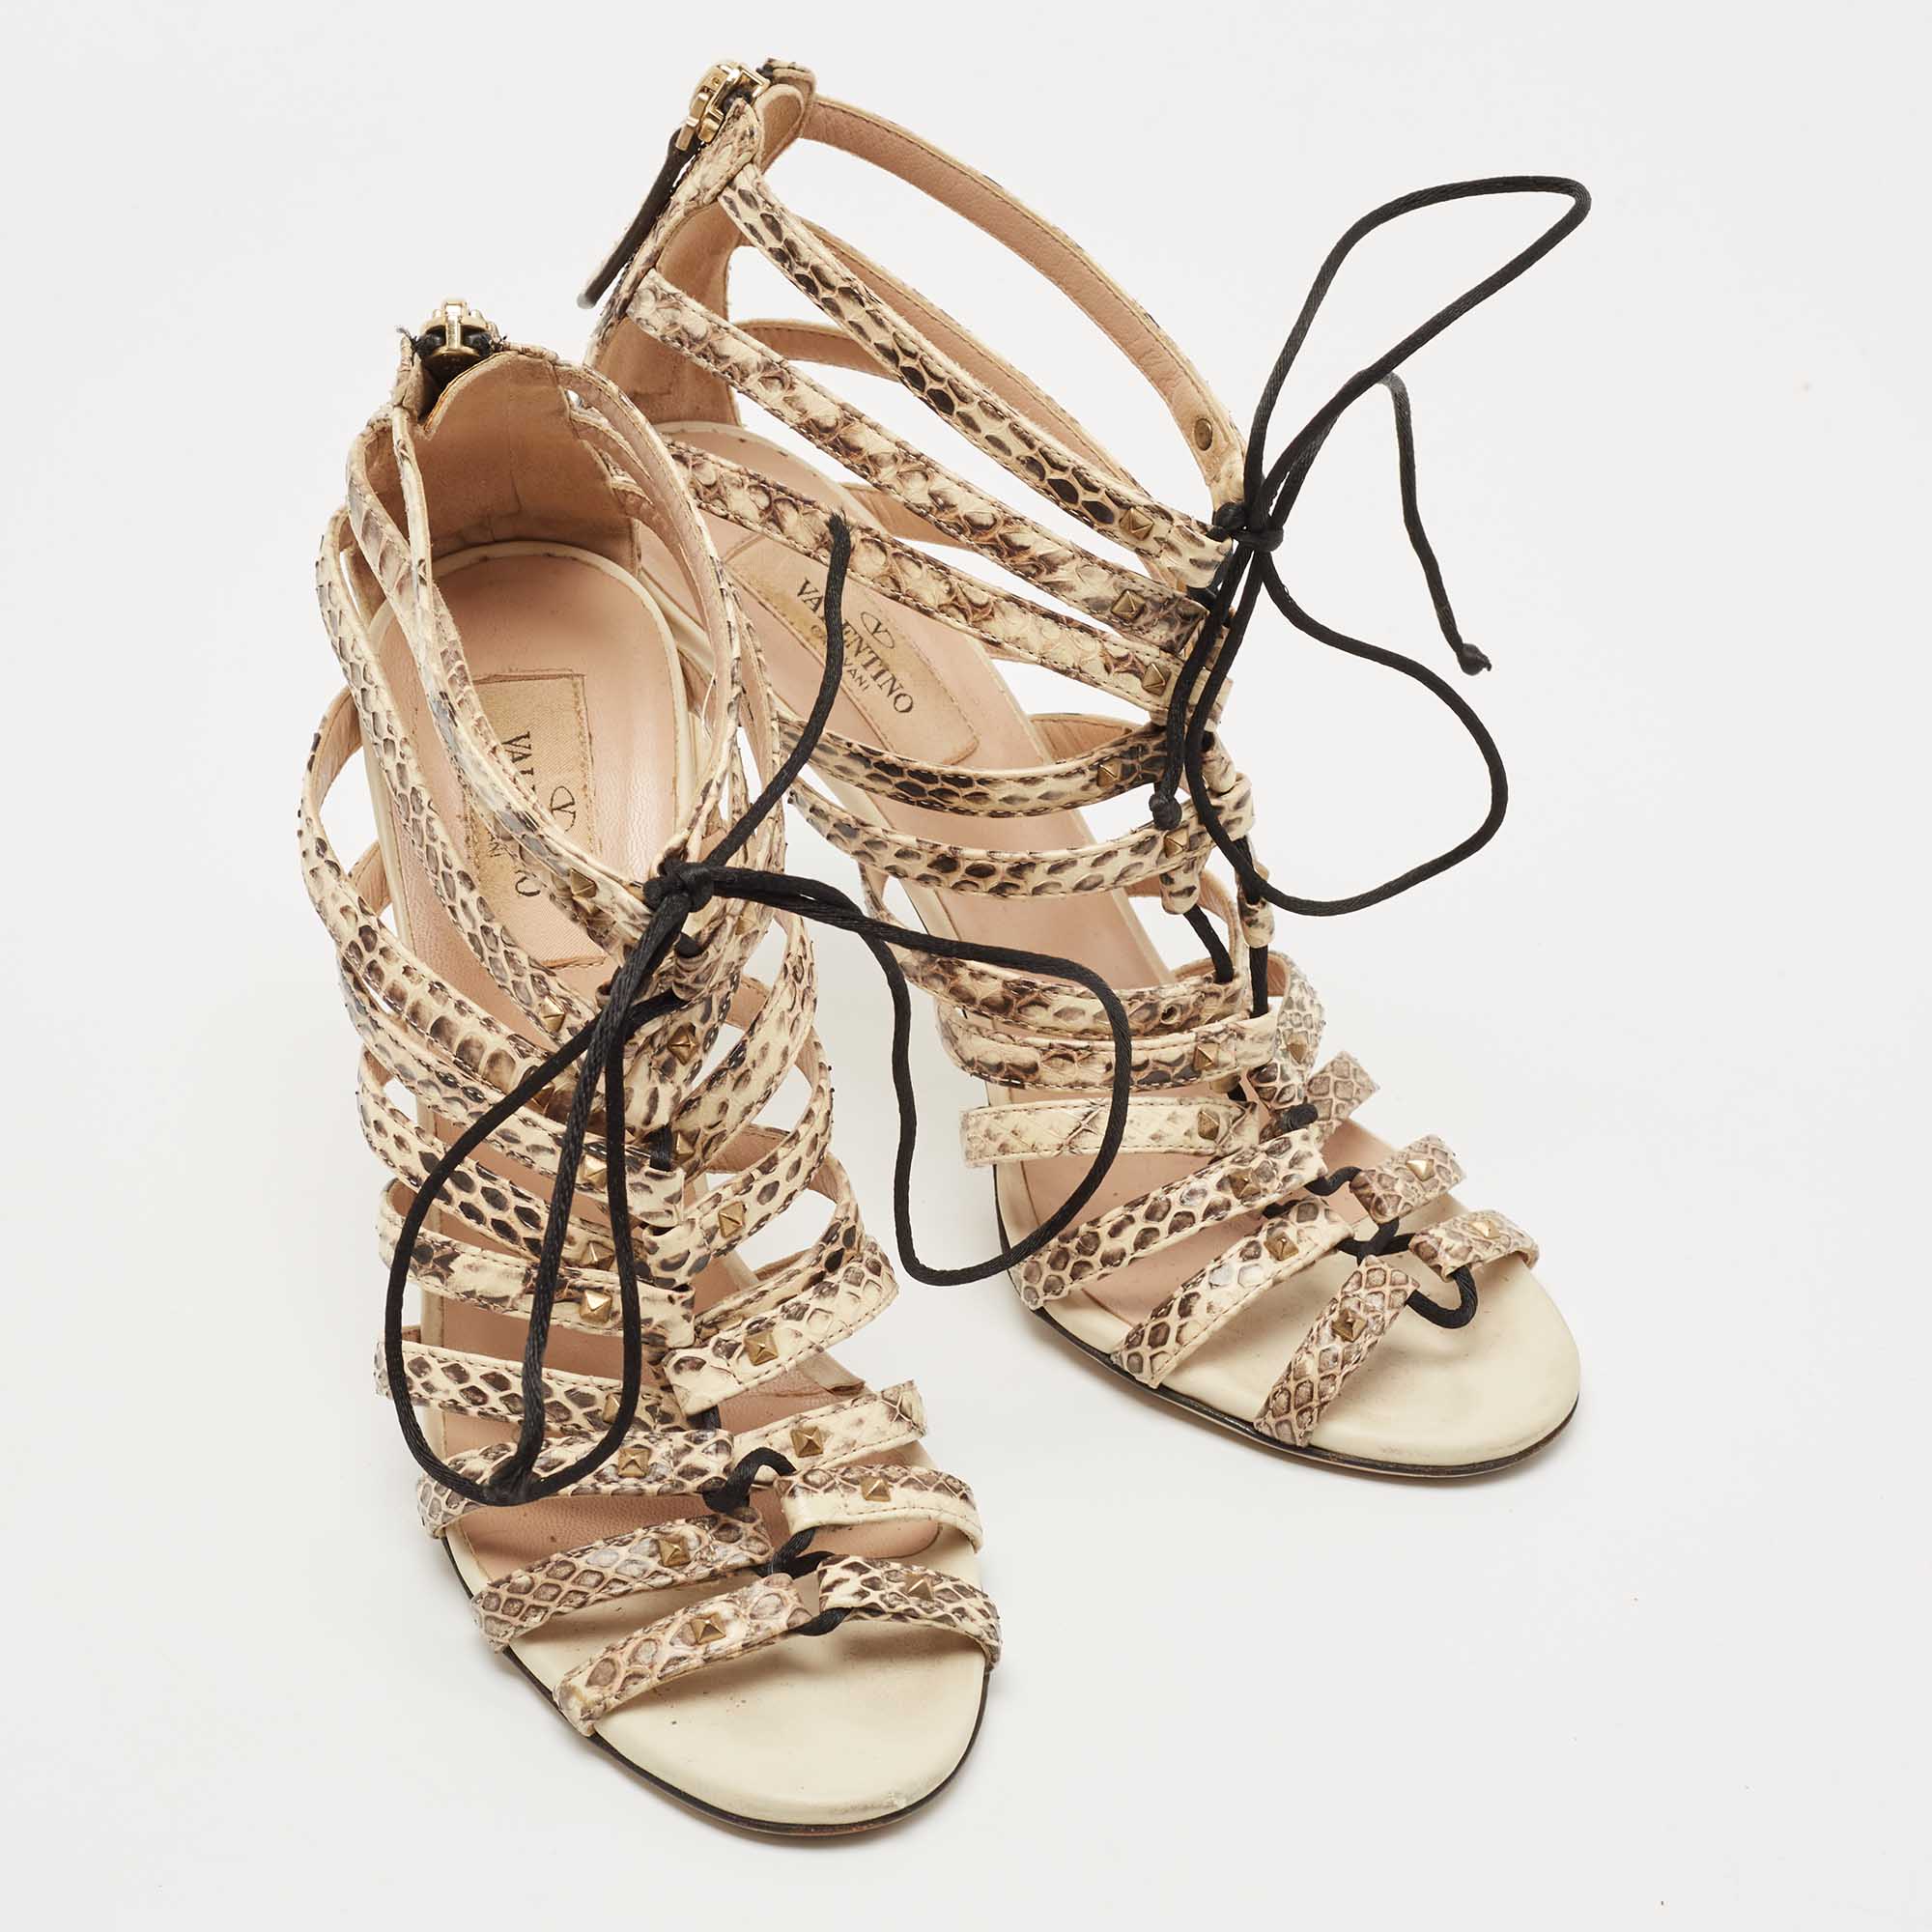 Valentino Brown/Beige Watersnake Rockstud Lace Up Strappy Sandals Size 37.5